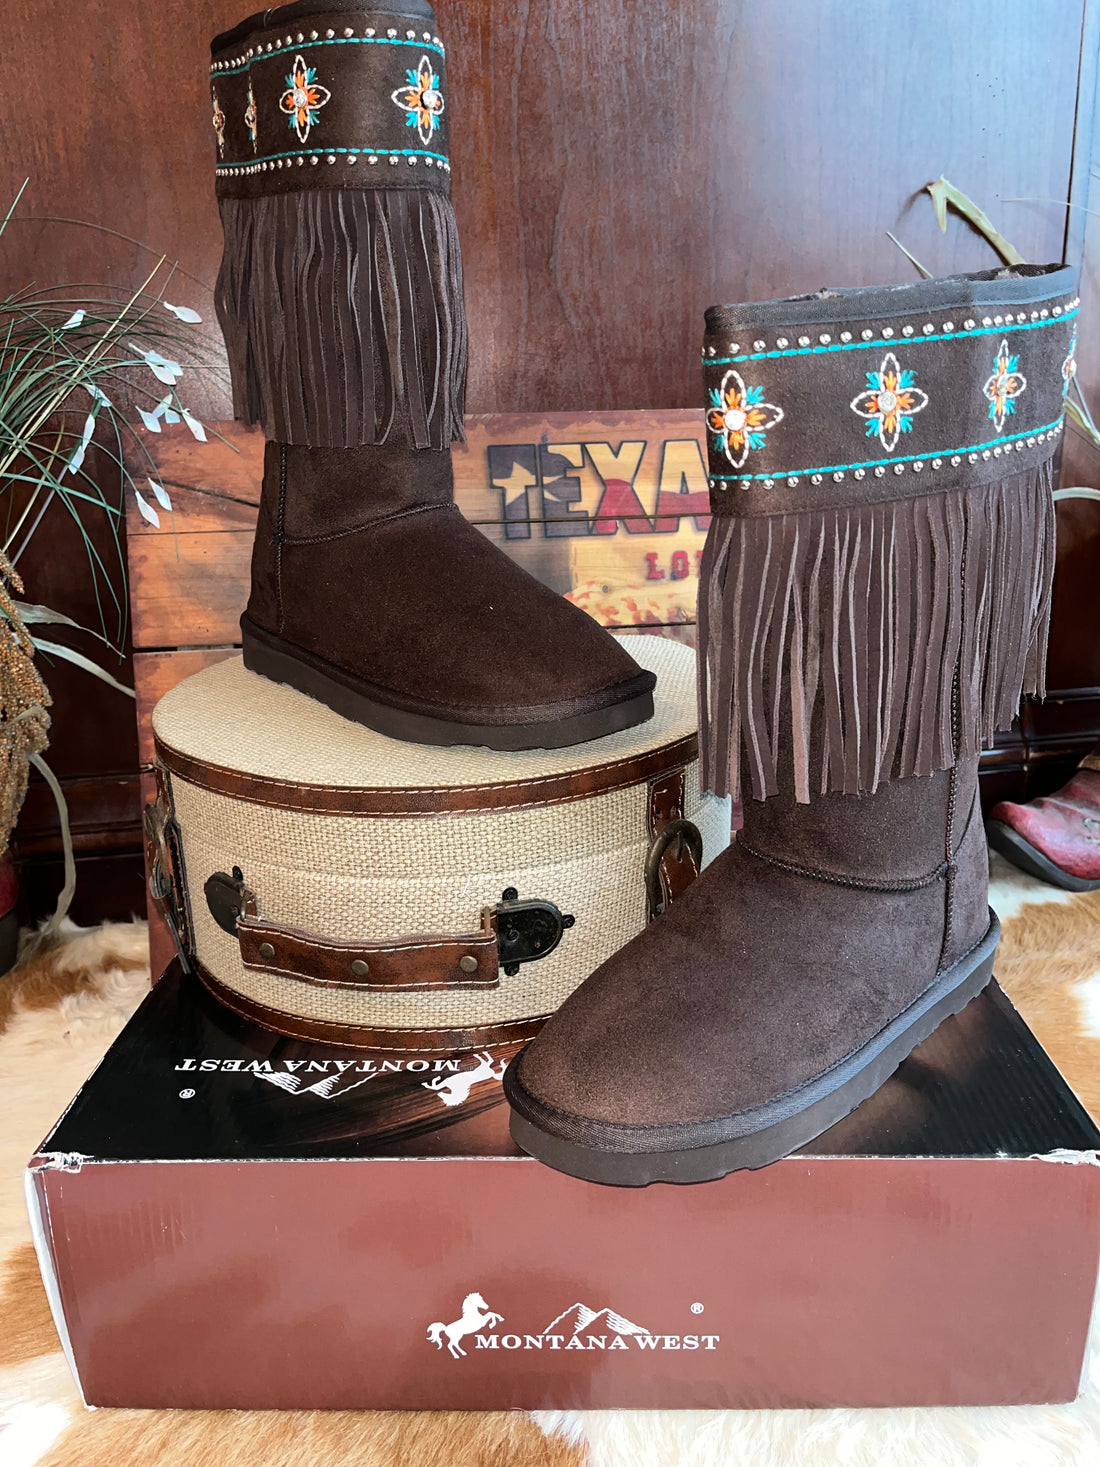 Full View-Montana West Mid Calf Dark Brown Fur Lined Boots with Flowers and Fringe